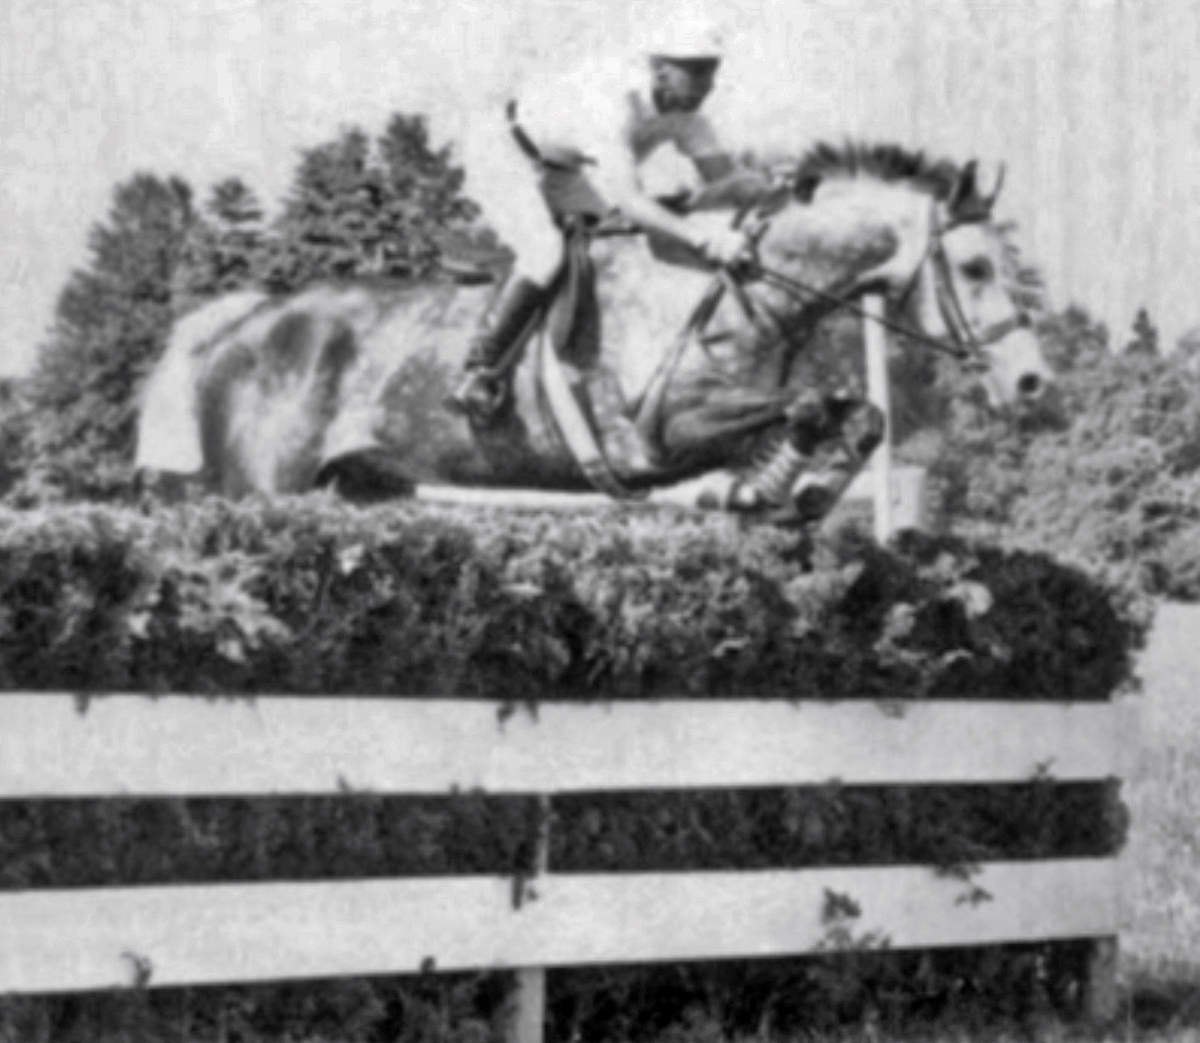 Bill Haggard during the Steeplechase phase of eventing at the 1959 Pan Am Games.